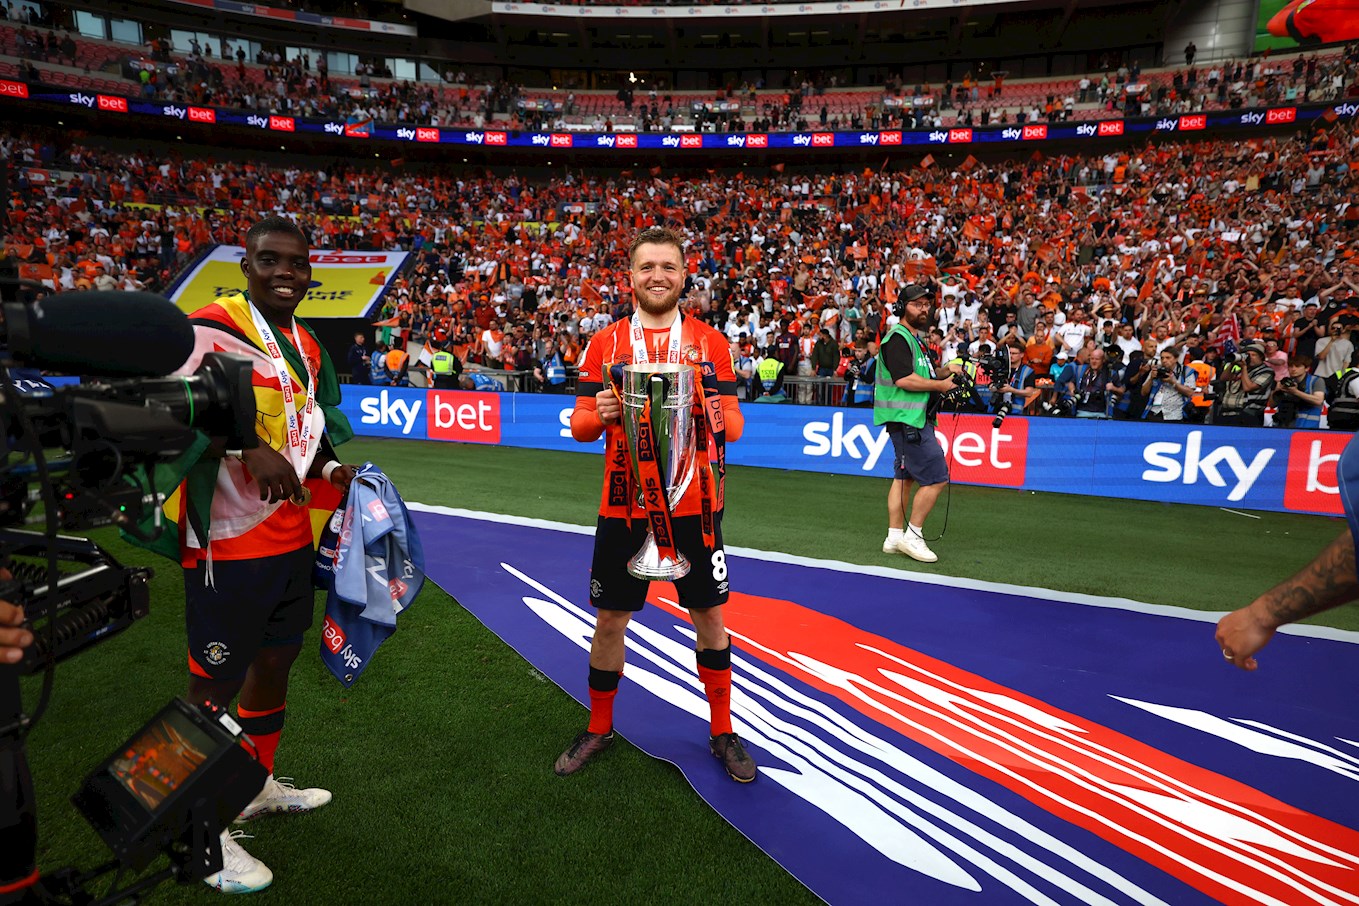 Berry holds the Championship play-off trophy at Wembley in May